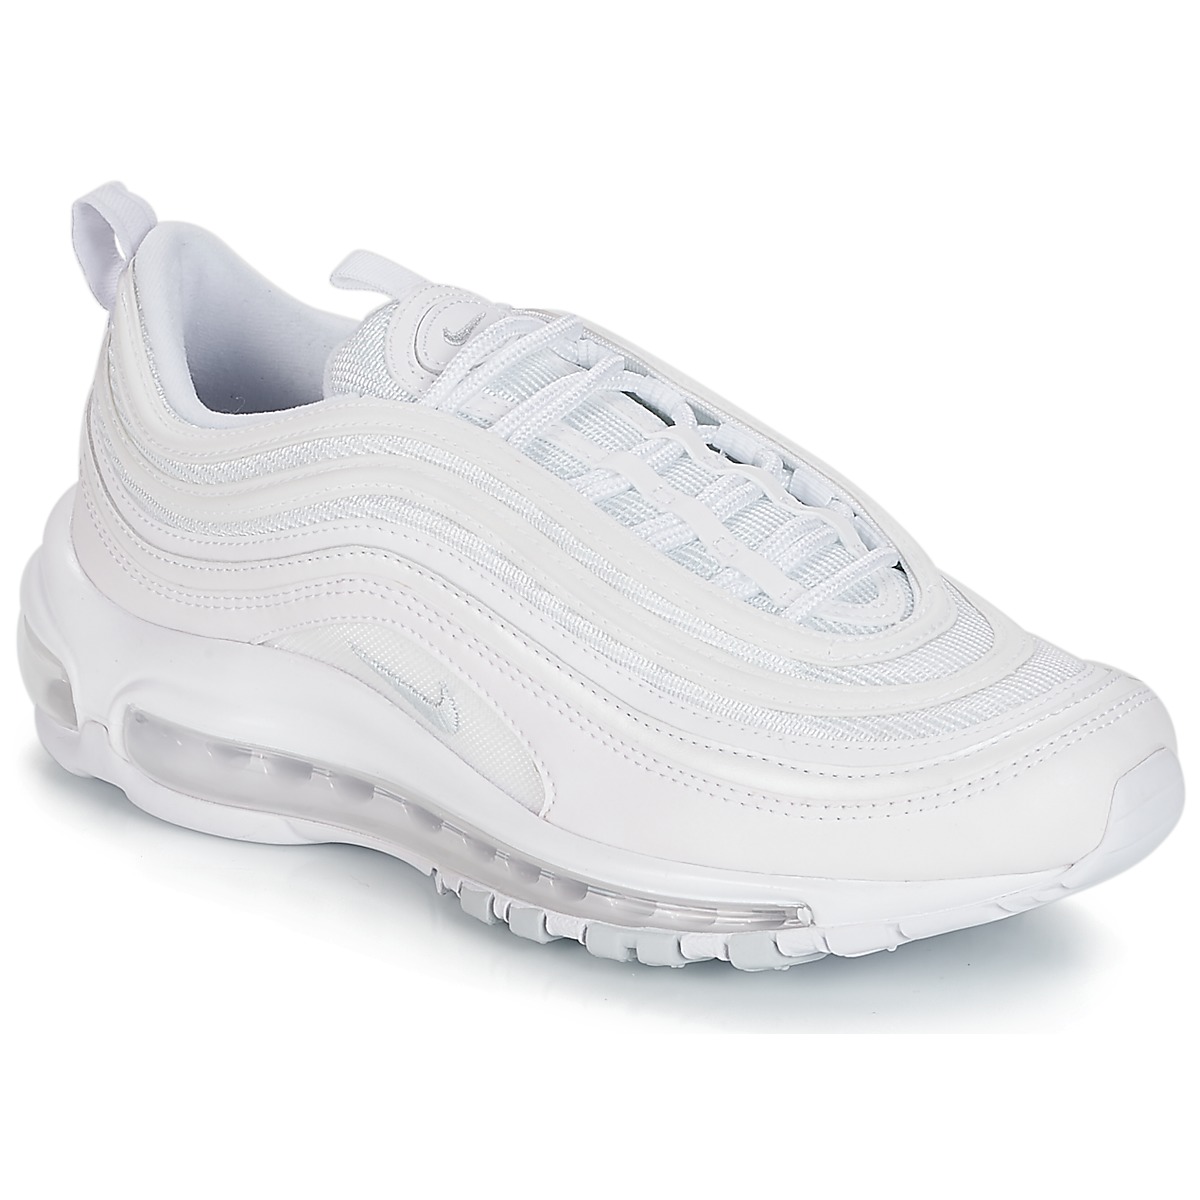 trainers nike 97 online -